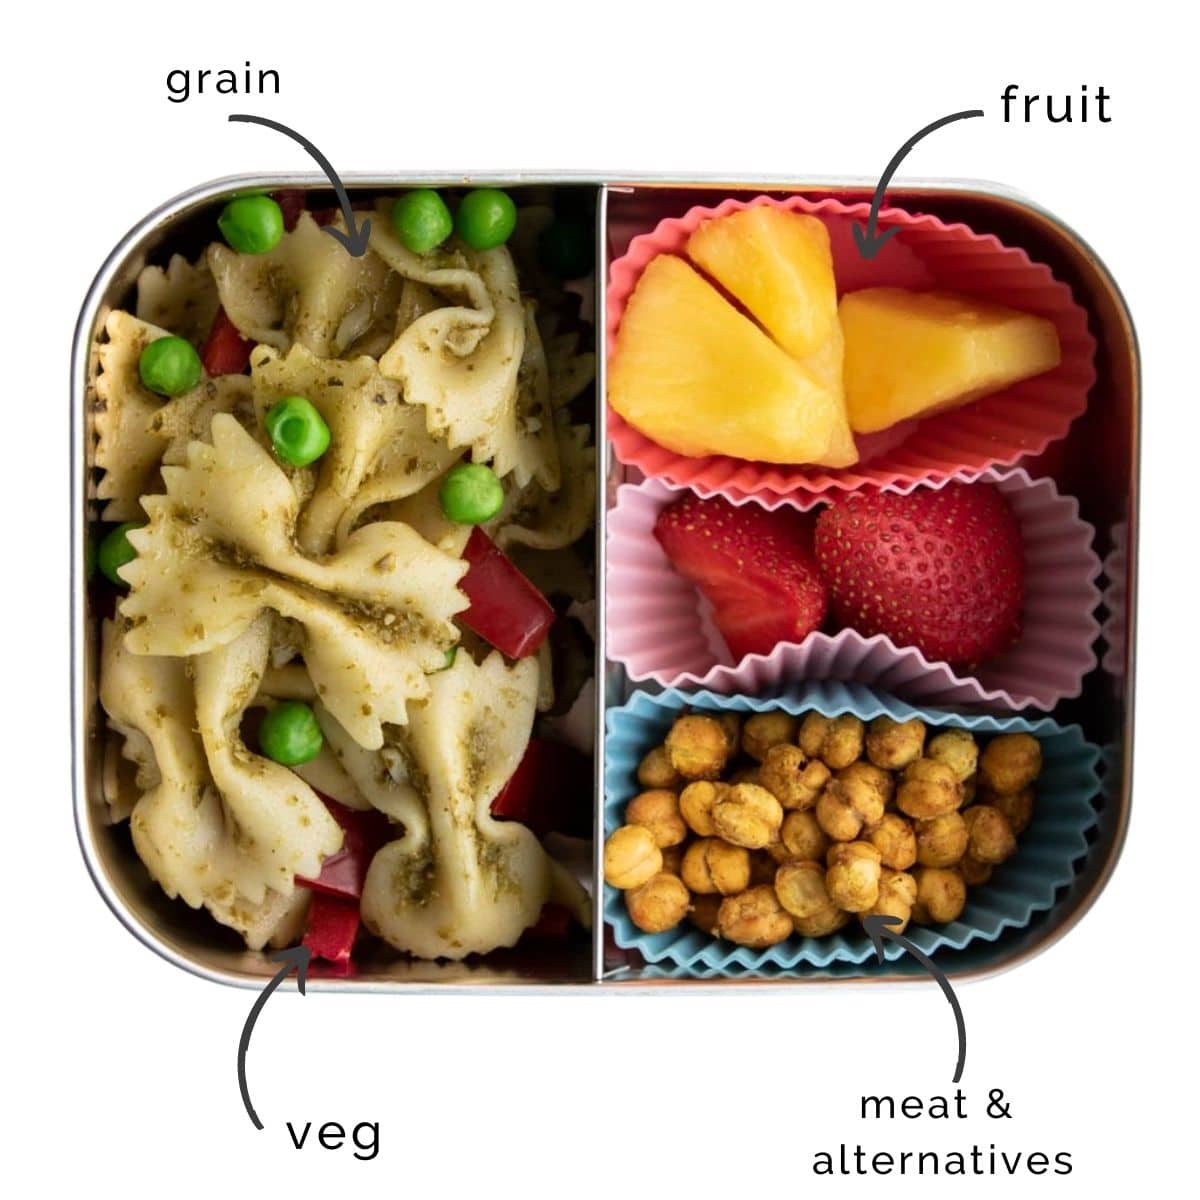 Bento Lunchbox with Pasta Pesto Salad, Pienapple, Strawberries and Baked Chickpeas